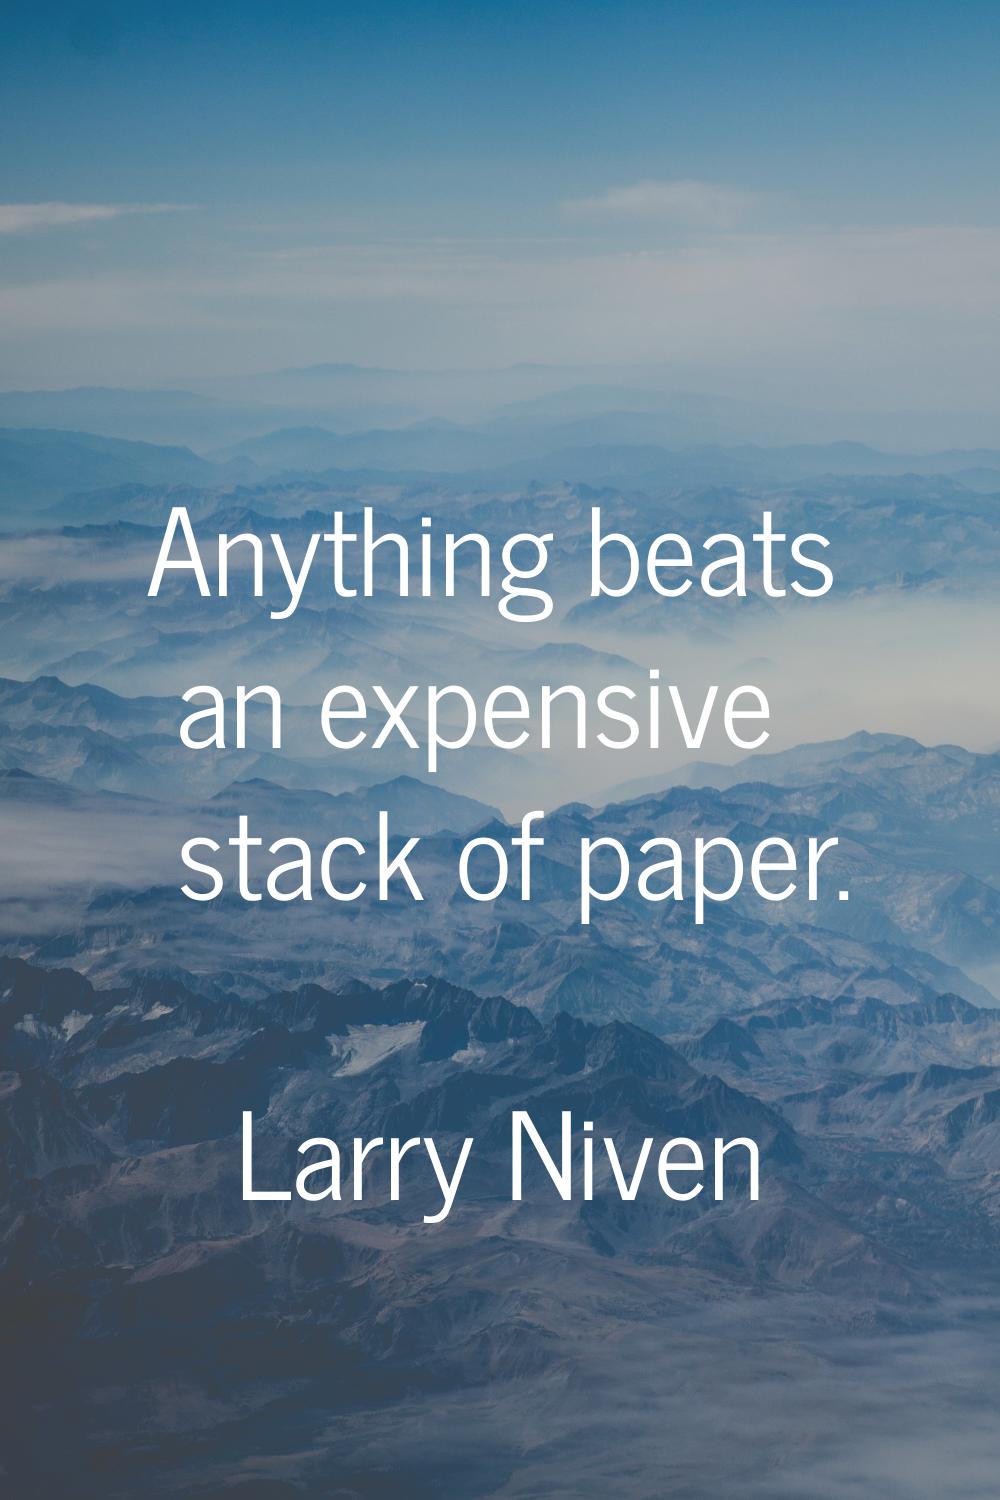 Anything beats an expensive stack of paper.